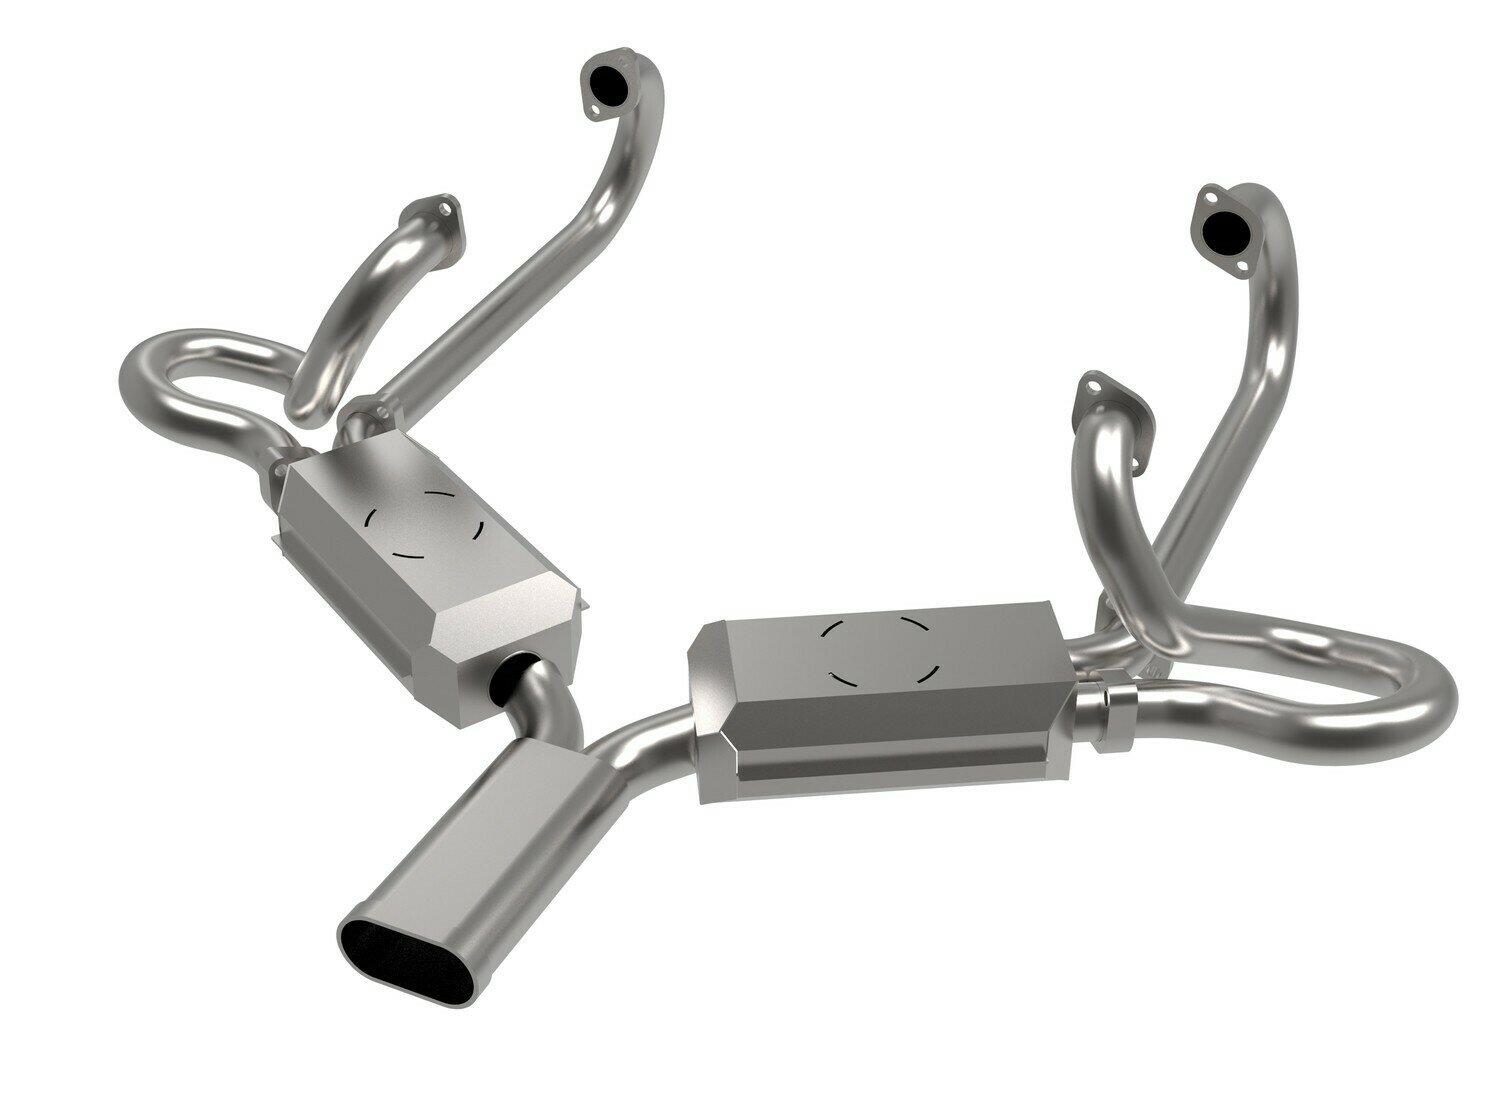 TYPE 1 1300 ~ 1600, QUIET SEBRING STYLE EXHAUST SYSTEM